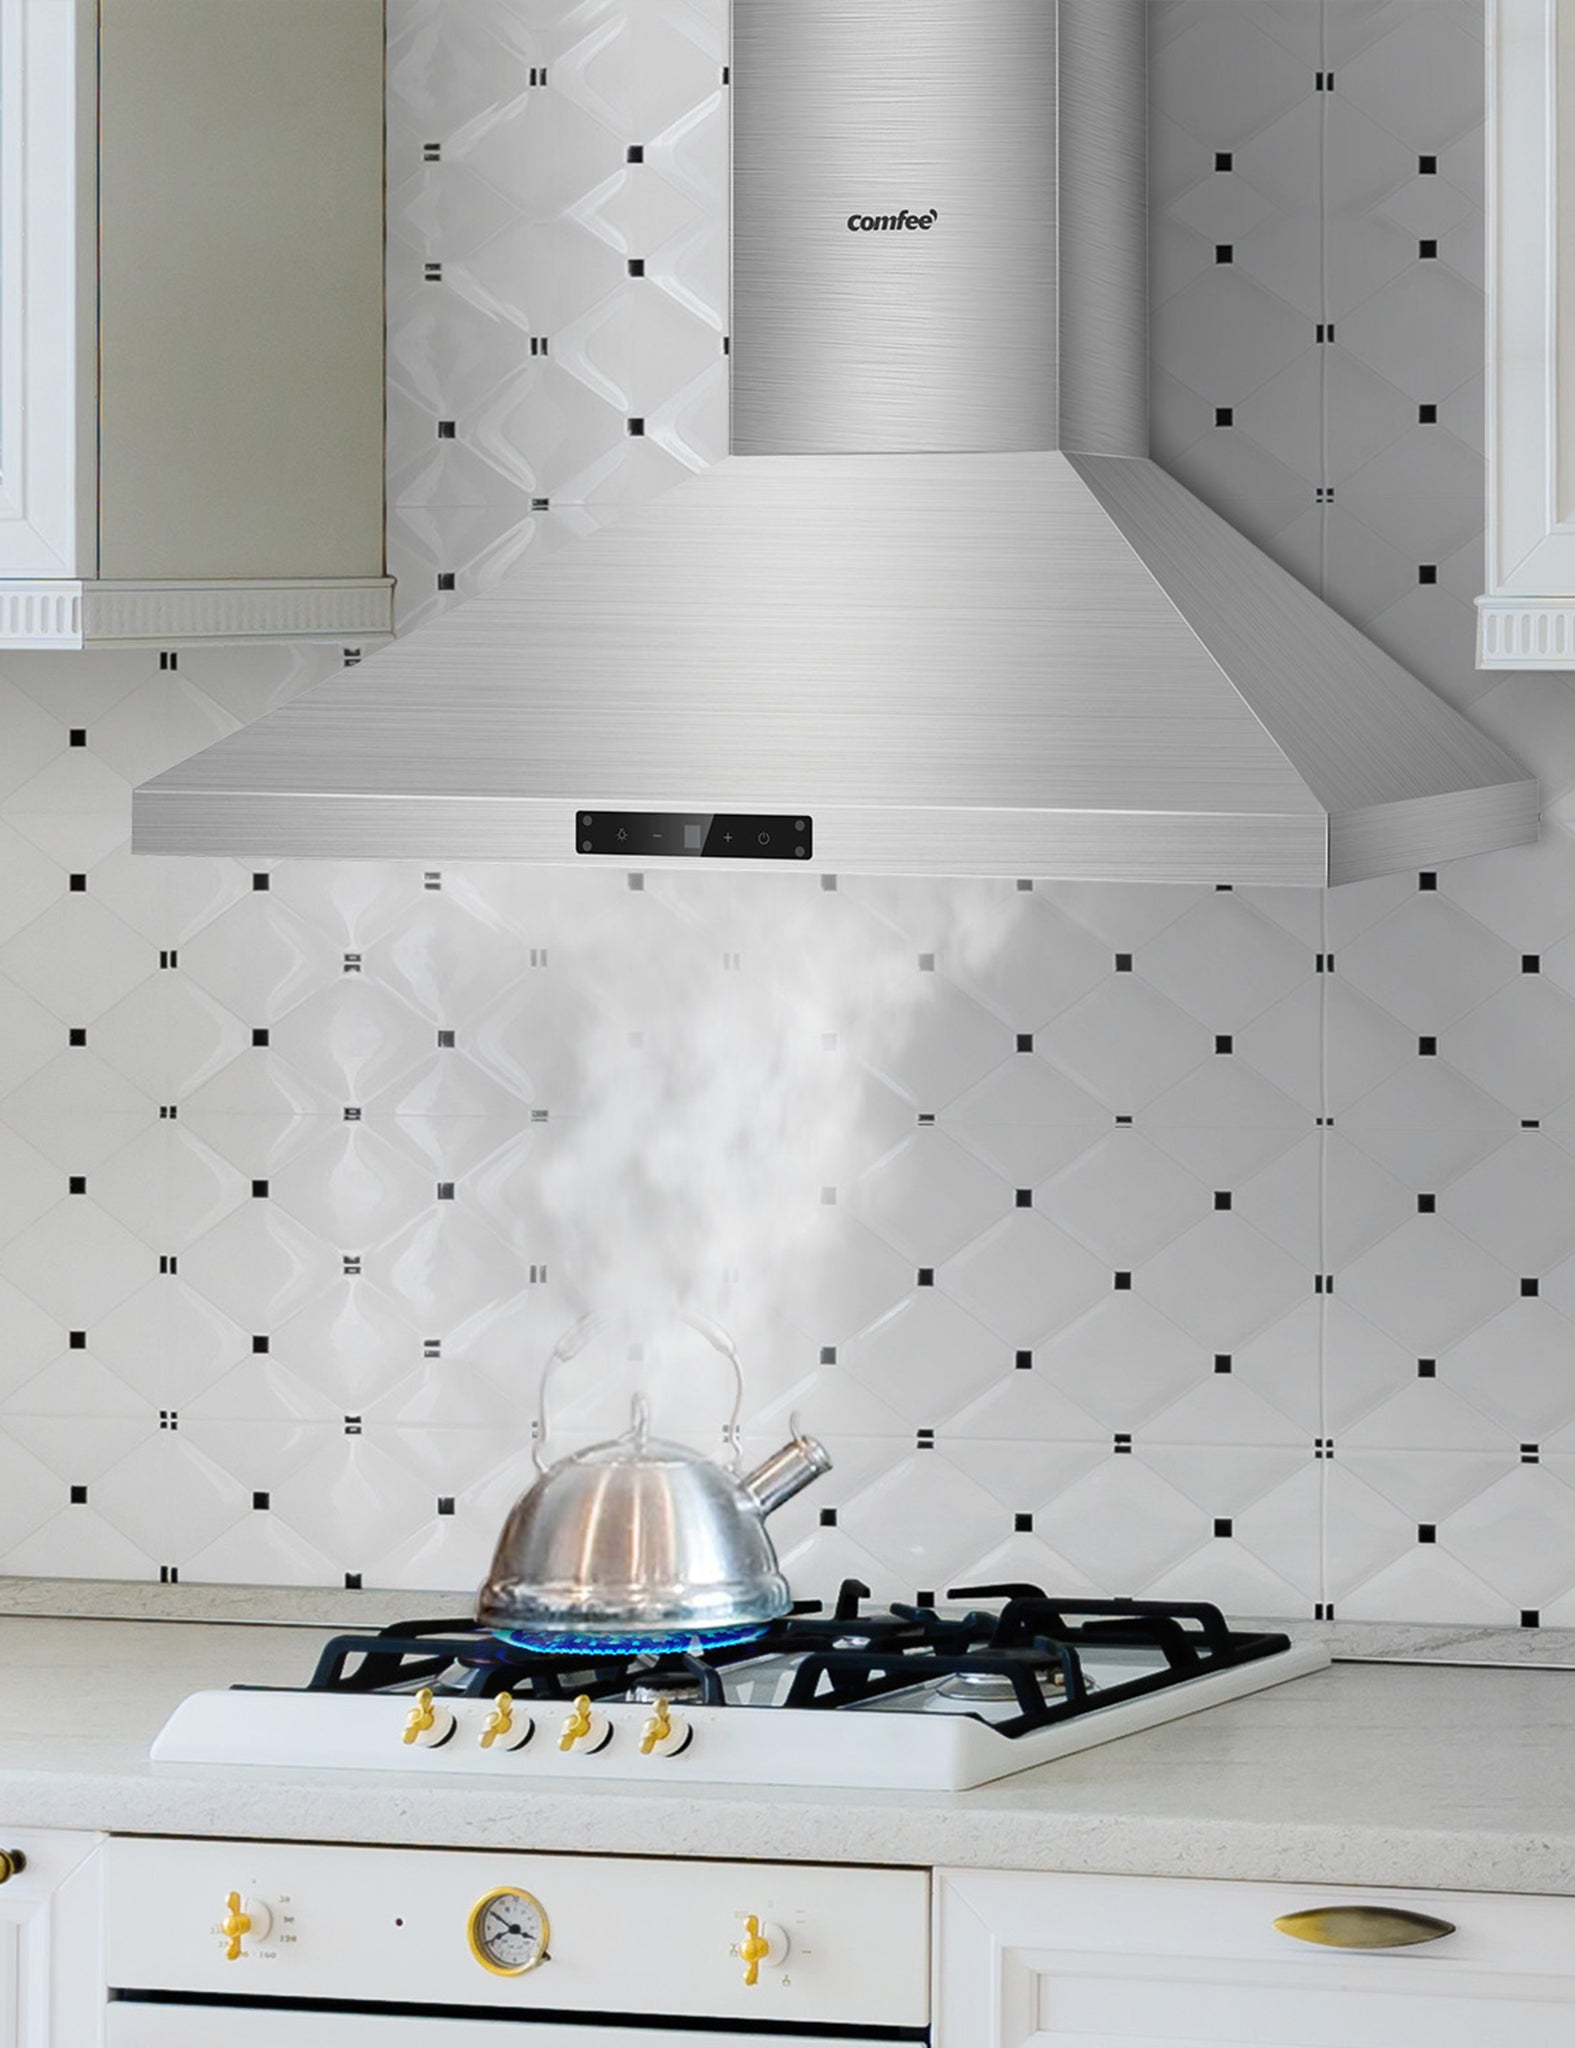 wall mount ducted range hood sucking smoke from a kettle on a oven